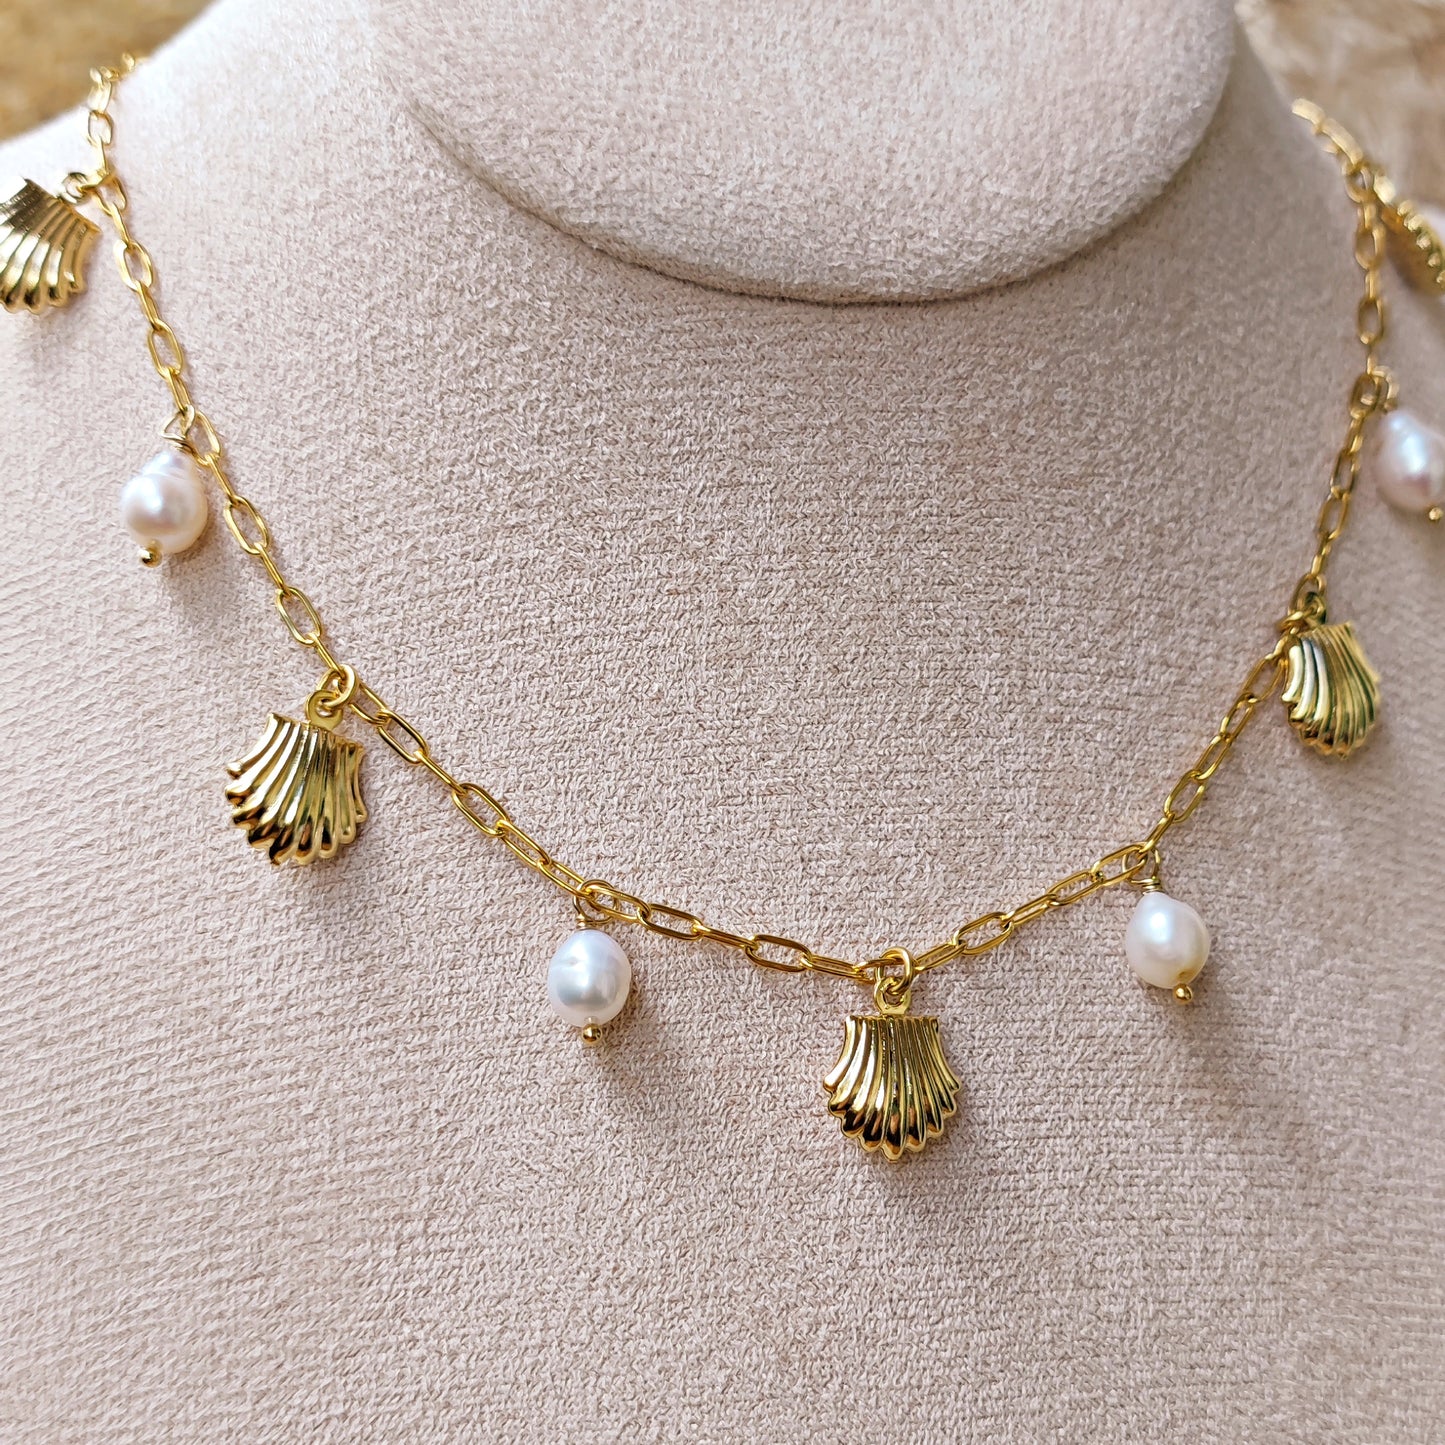 "Tethys" Choker Necklace with seashells and freshwater pearls